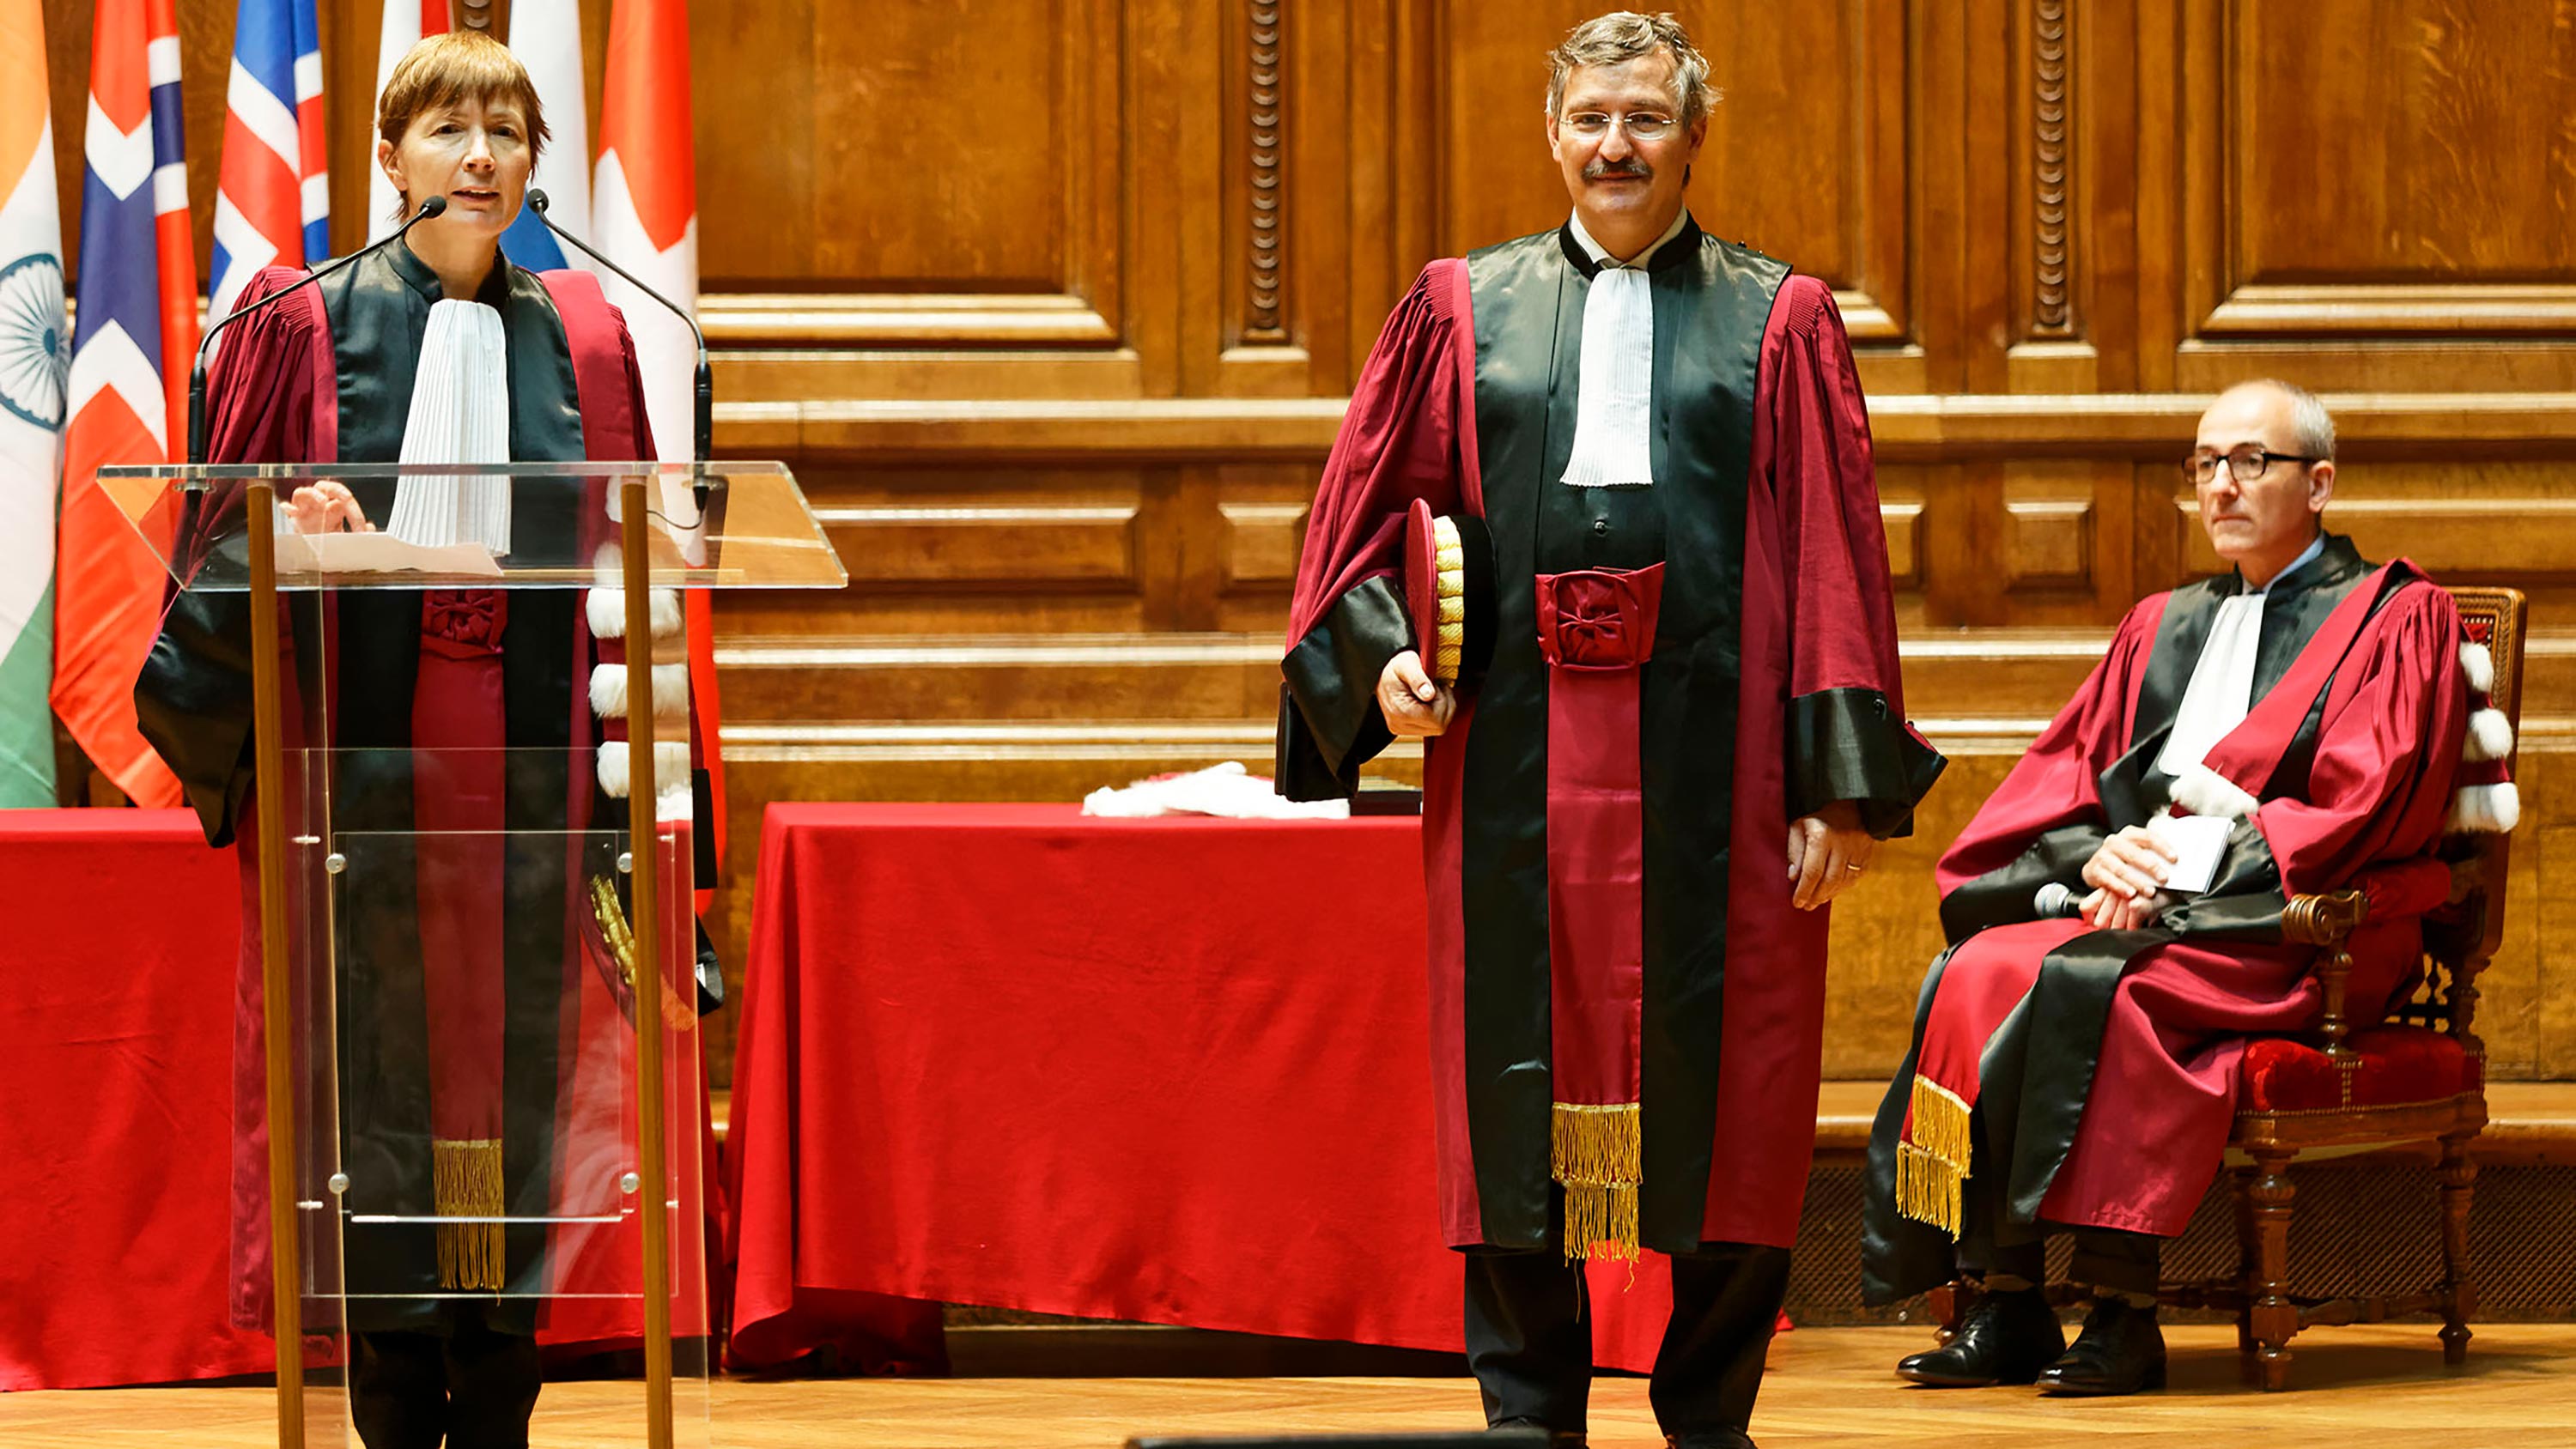 Pomp and circumstance: In October 2016, Michael Hengartner was awarded the title of Doctor honoris causa at the Université Pierre et Marie Curie (today: Paris-Sorbonne) for his services to academia.